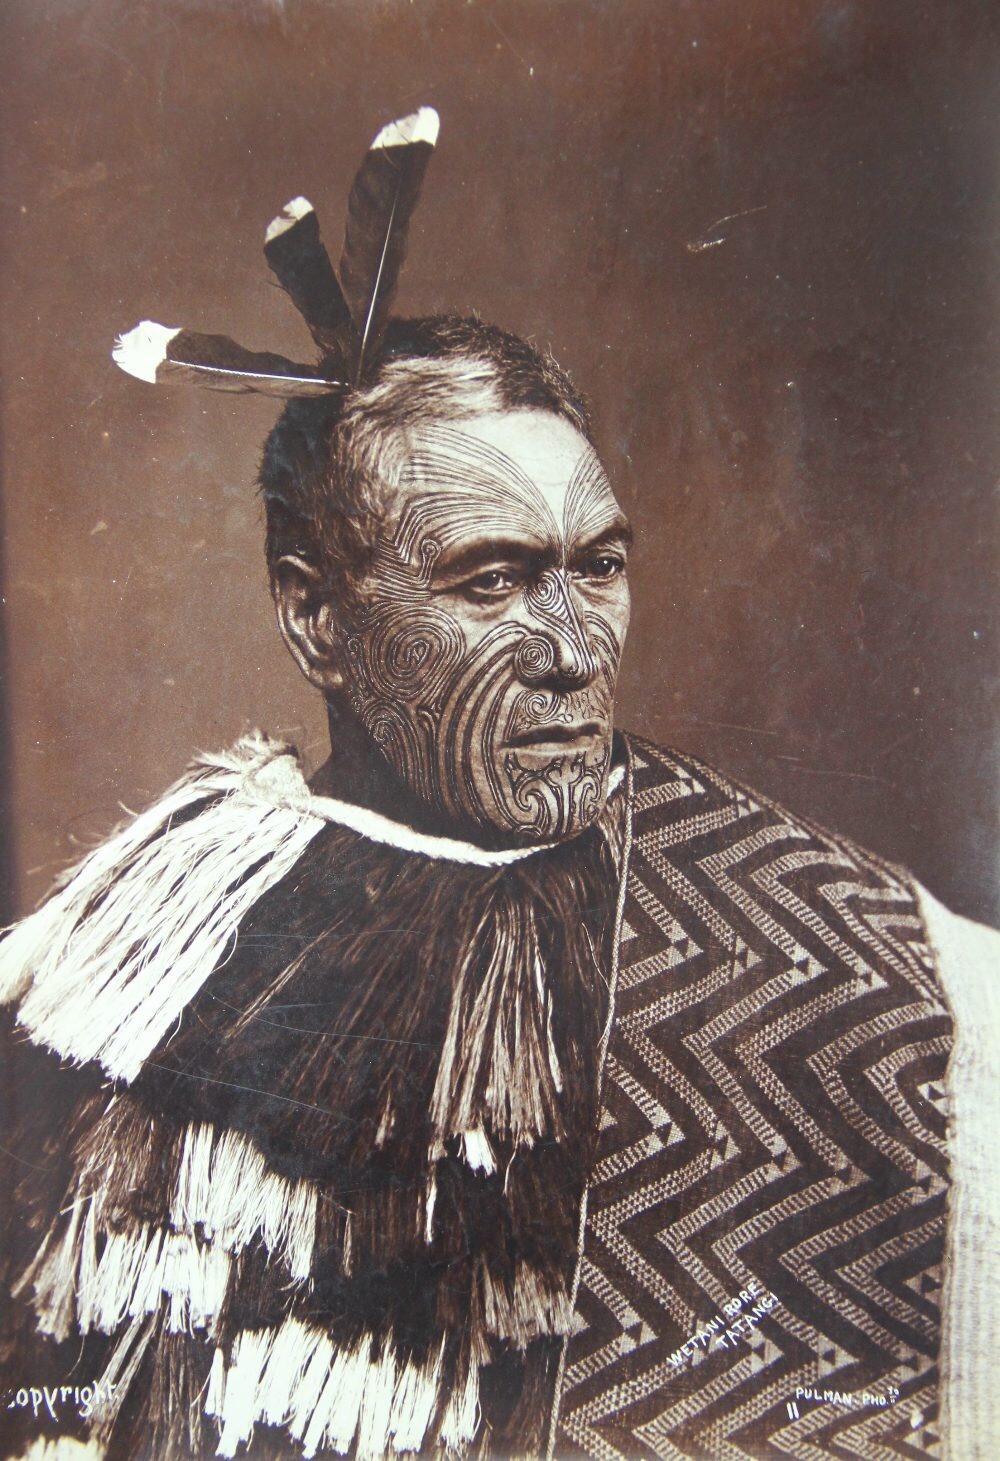 Elizabeth Pulman (1836-1900) - Wetani Rore Tatangi
Albumen photograph. Taken c.1880′s
Pulman is regarded as New Zealand’s first professional female photographer. Note the now extinct huia’s feathers in his hair.